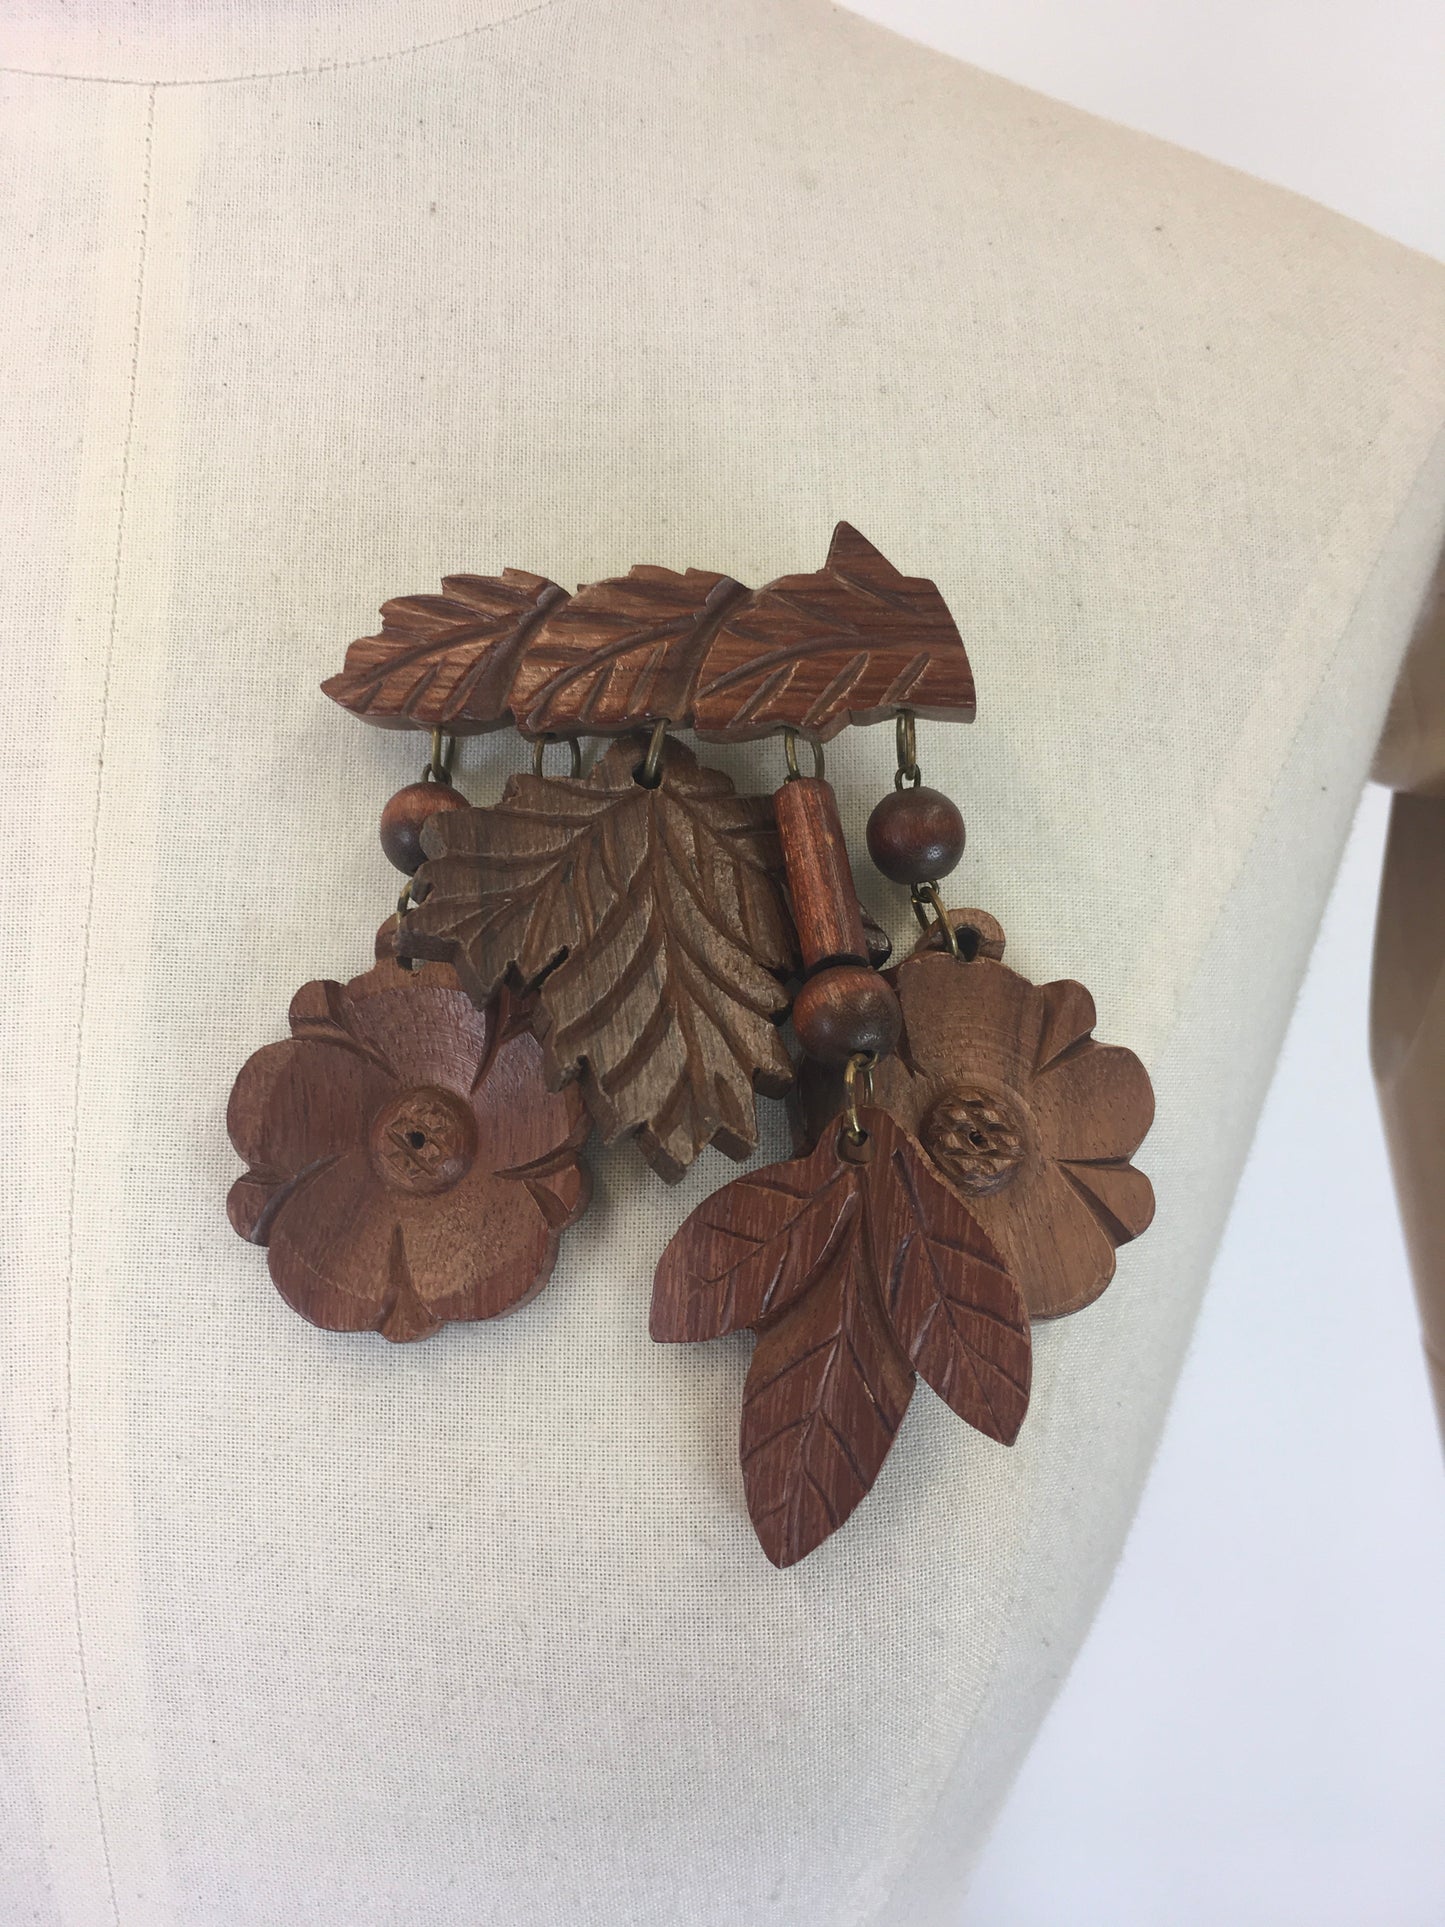 Original 1940’s Huge Autumnal Wooden Brooch - With Carved Leaves and Florals